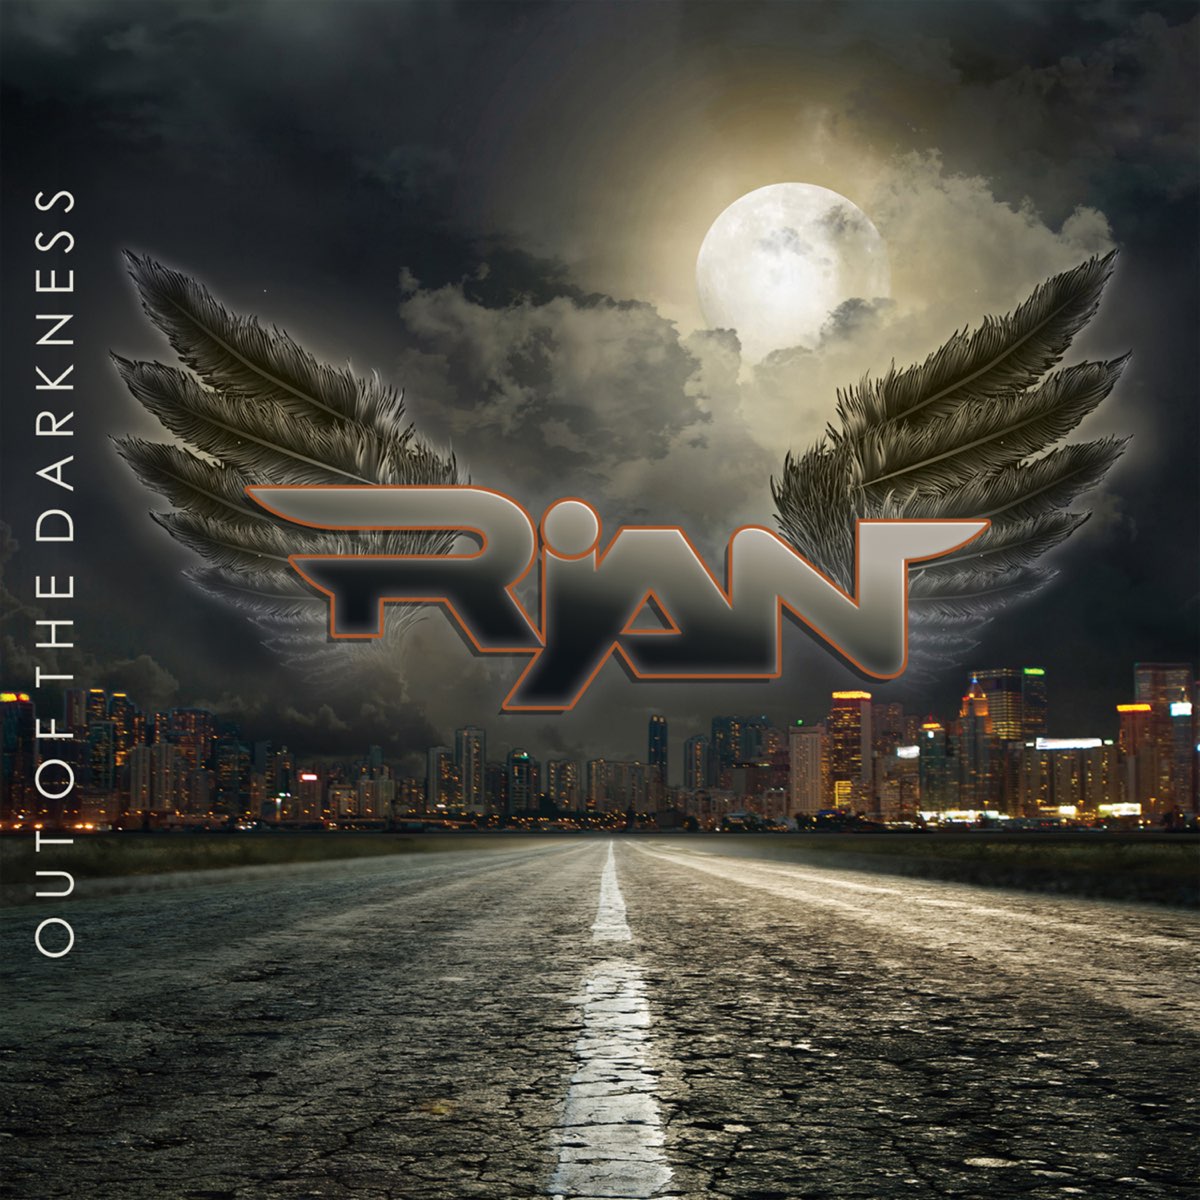 2017 flac. Rian - out of the Darkness - 2017. Дискография Rian (out of the Darkness. Dark album. AOR – L.A Darkness.